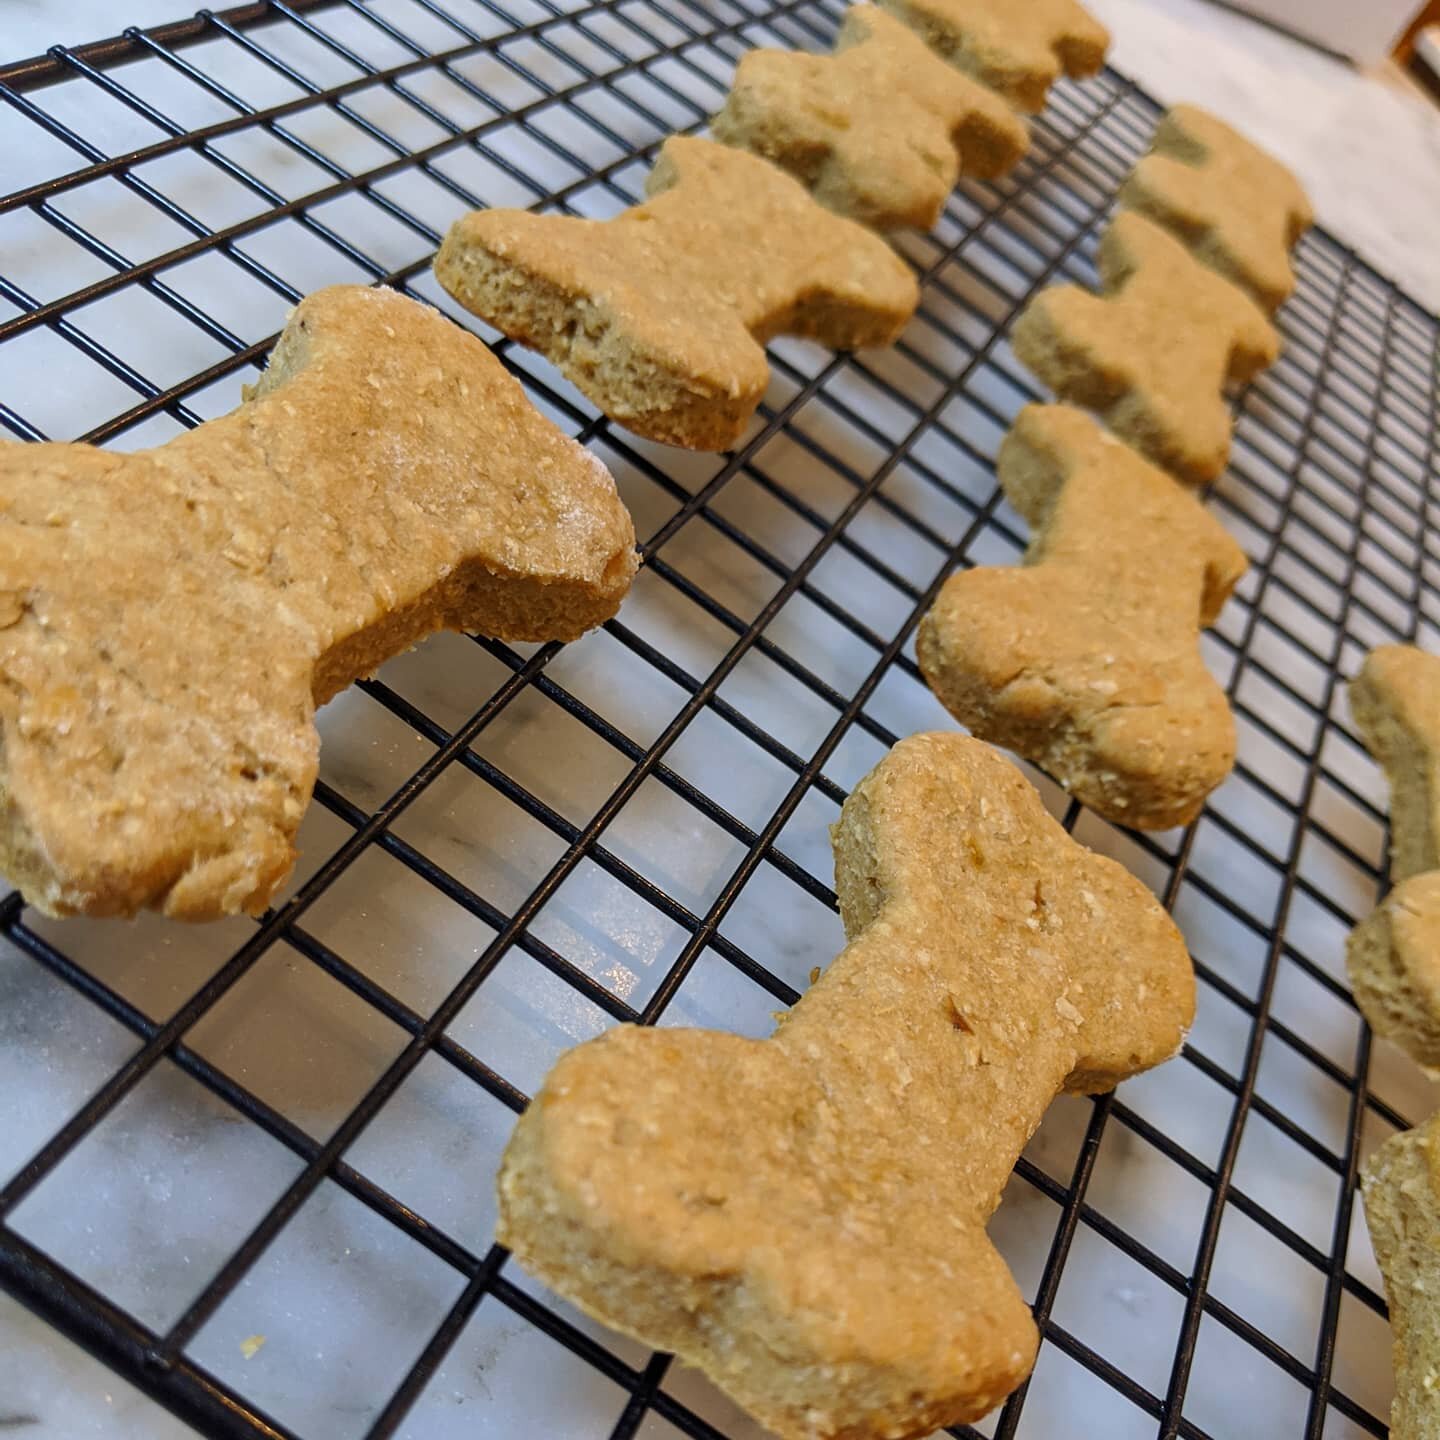 Need to stretch your legs? Take a stroll to Felix Culpa with your pooch to enjoy some coffee and freshly baked dog biscuits! 
#peanutbutterdogbiscuits
.
.
.
.
.
.
.
.
.
#homemade #exercise #local #supportlocal #felixculpacoffee #resevoir #foodaholic 